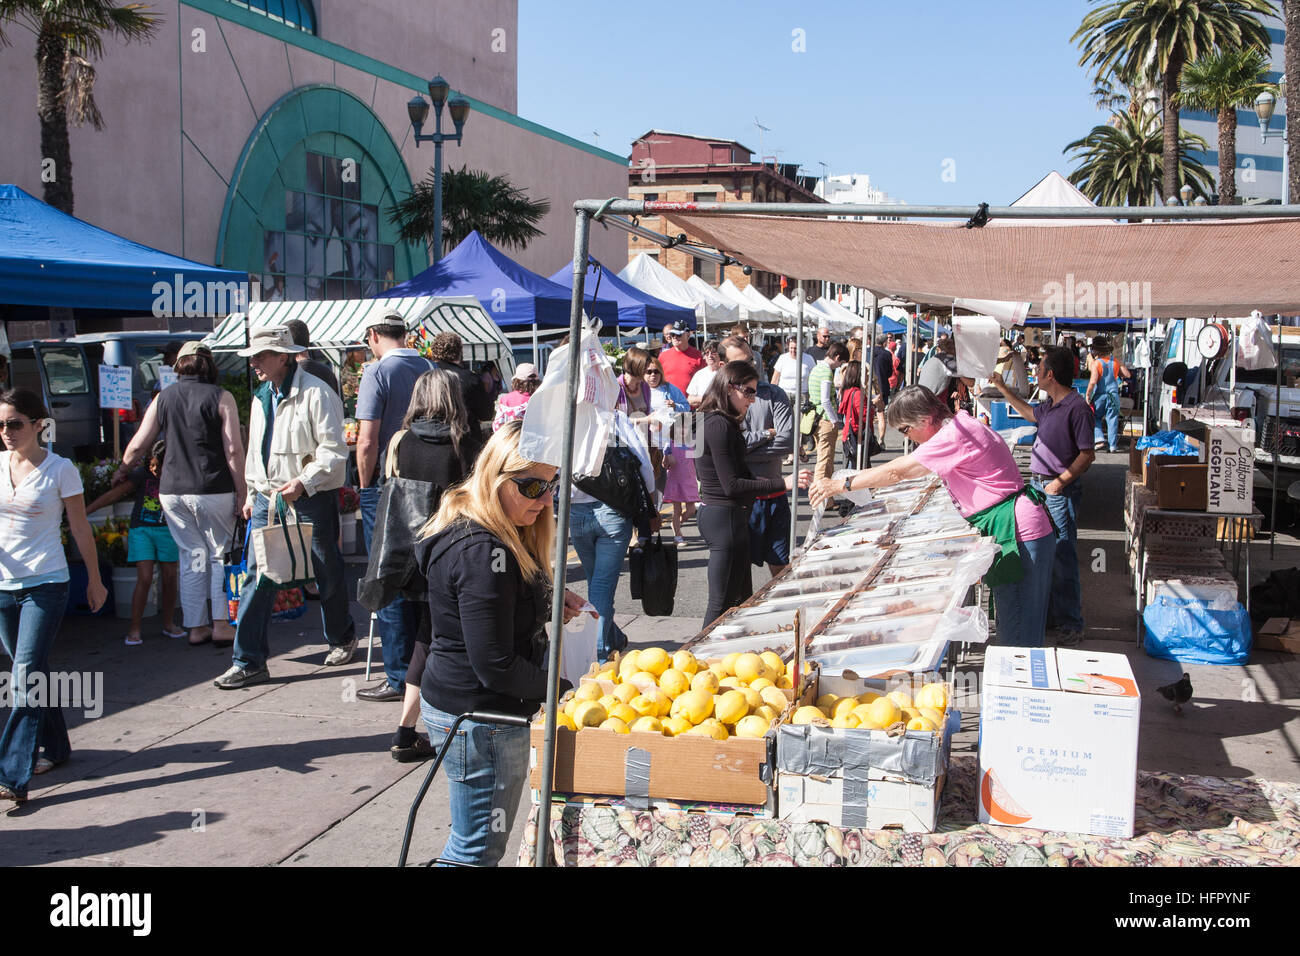 Organic Farmers Market at Santa Monica,National Highway 1,Pacific Coast Highway,PCH, California,U.S.A.,United States of America, Stock Photo